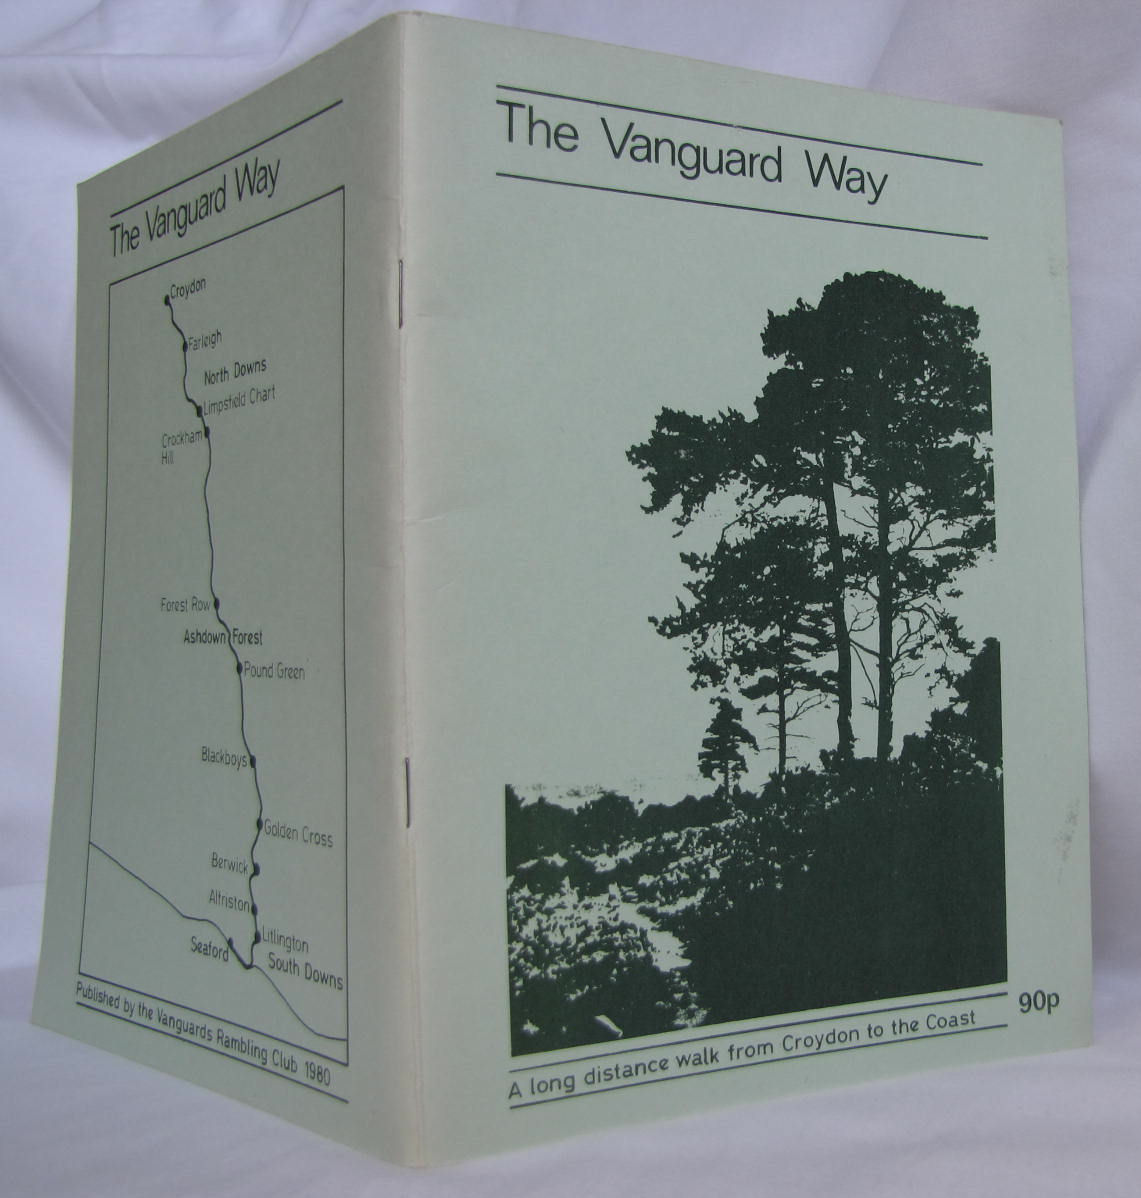 First edition of the Vanguard Way guide book